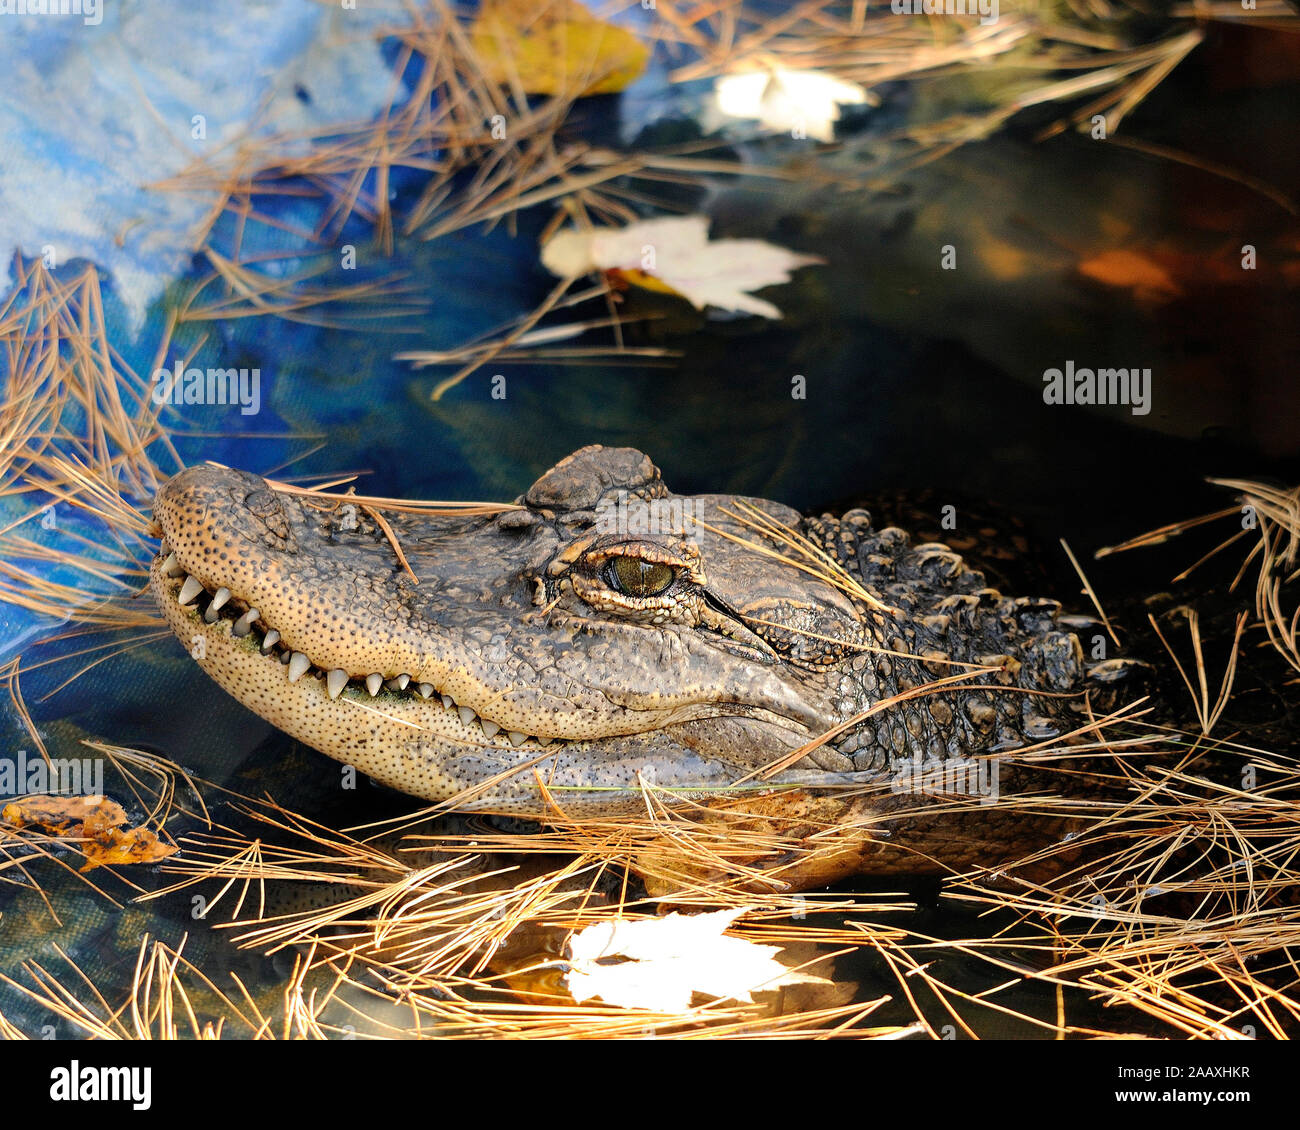 Alligator head close-up profile view in the water basking in sunlight showing its head, eye, teeth in its environment and surrounding. Stock Photo